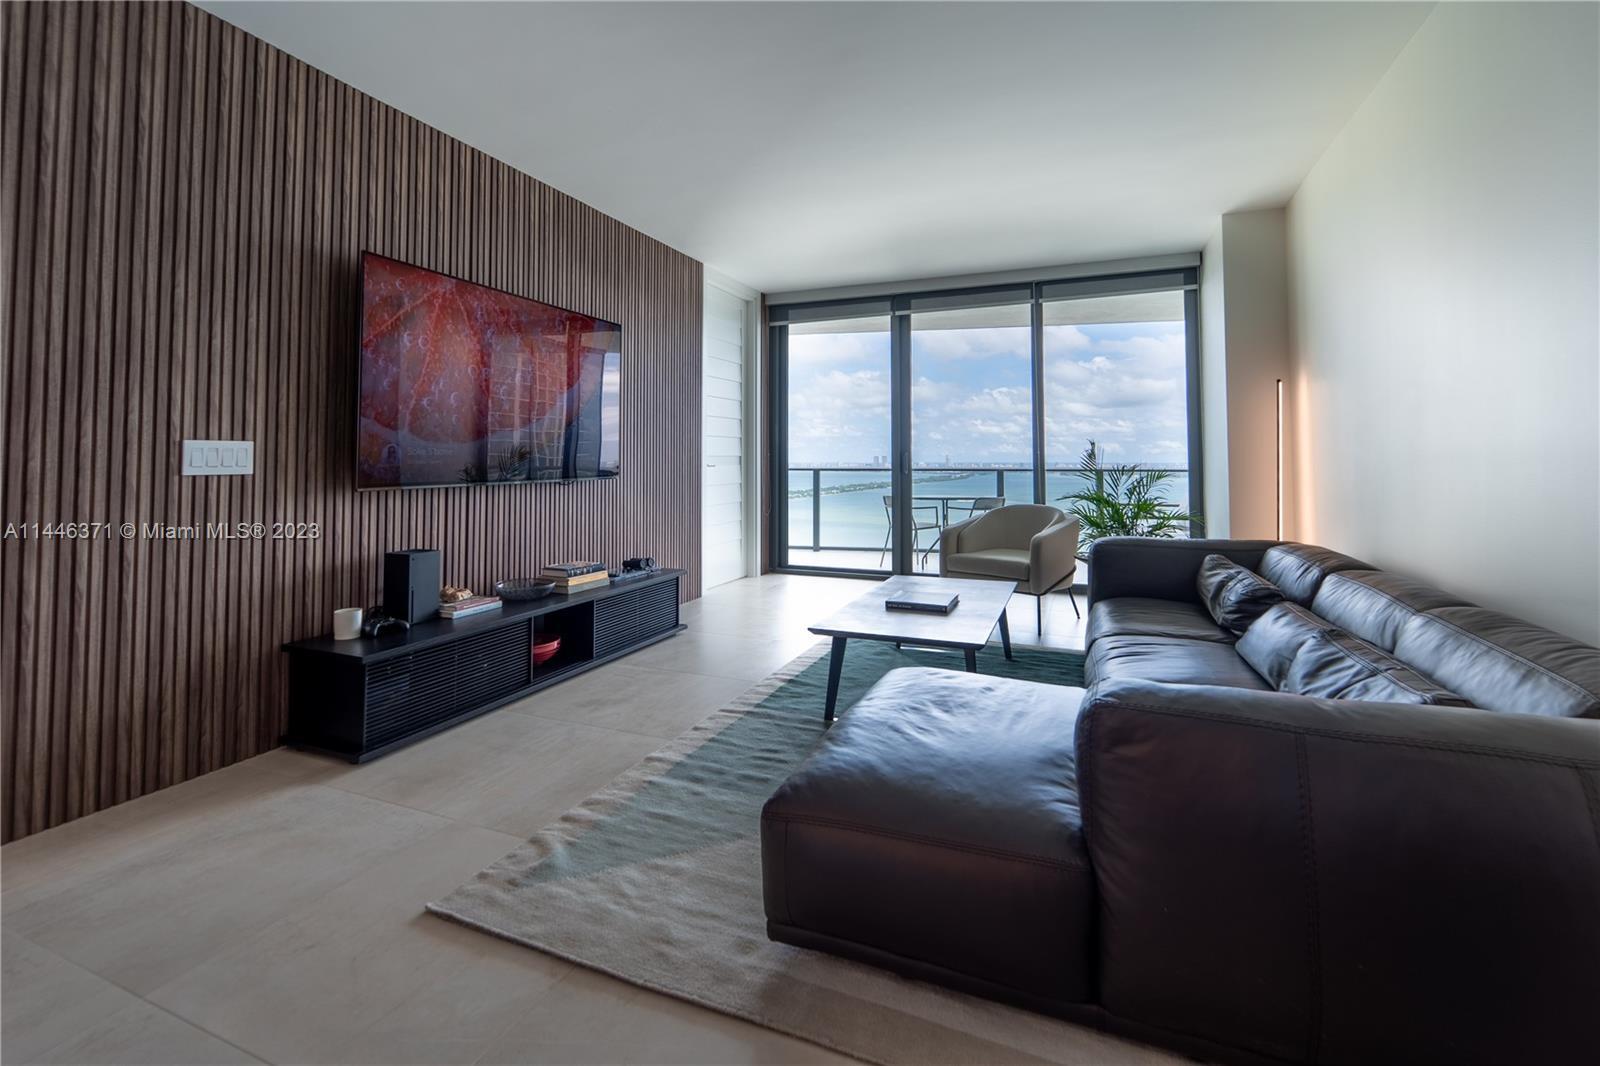 LUXURY RENOVATED TURNKEY CONDO FOR SALE WITH STUNNING DIRECT VIEWS OF BISCAYNE BAY, THE OCEAN & MIAM